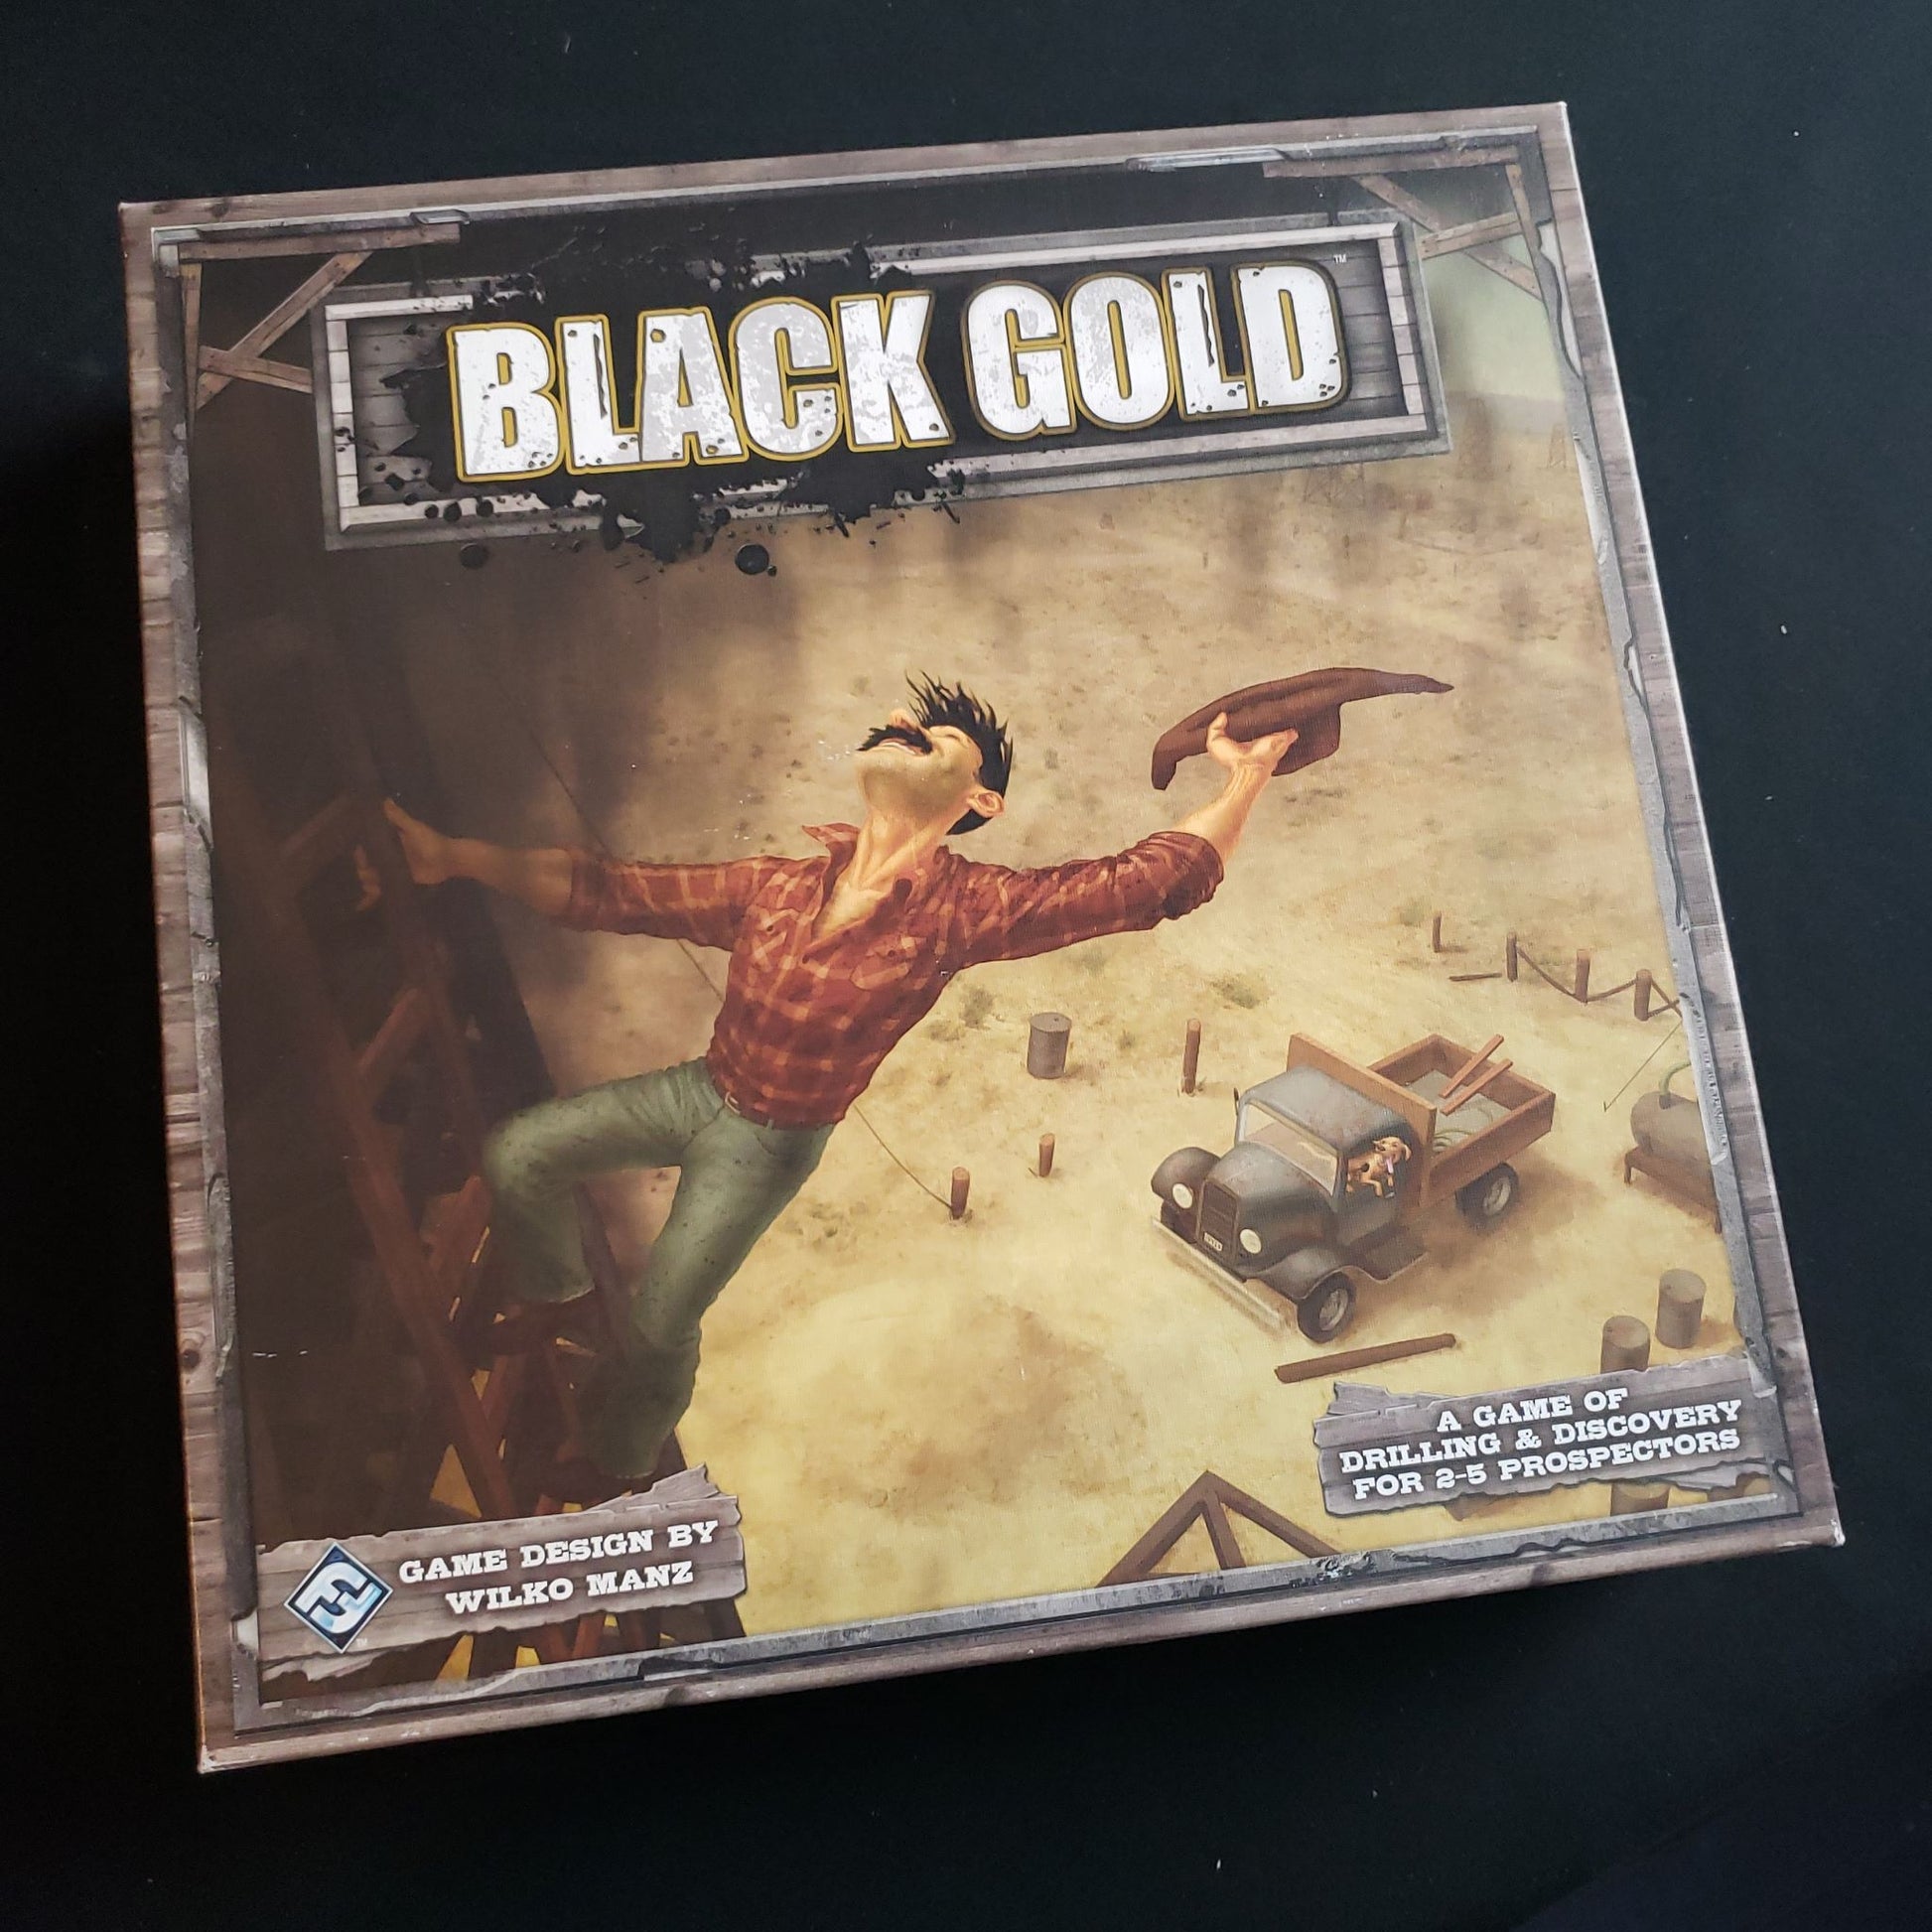 Image shows the front cover of the box of the Black Gold board game